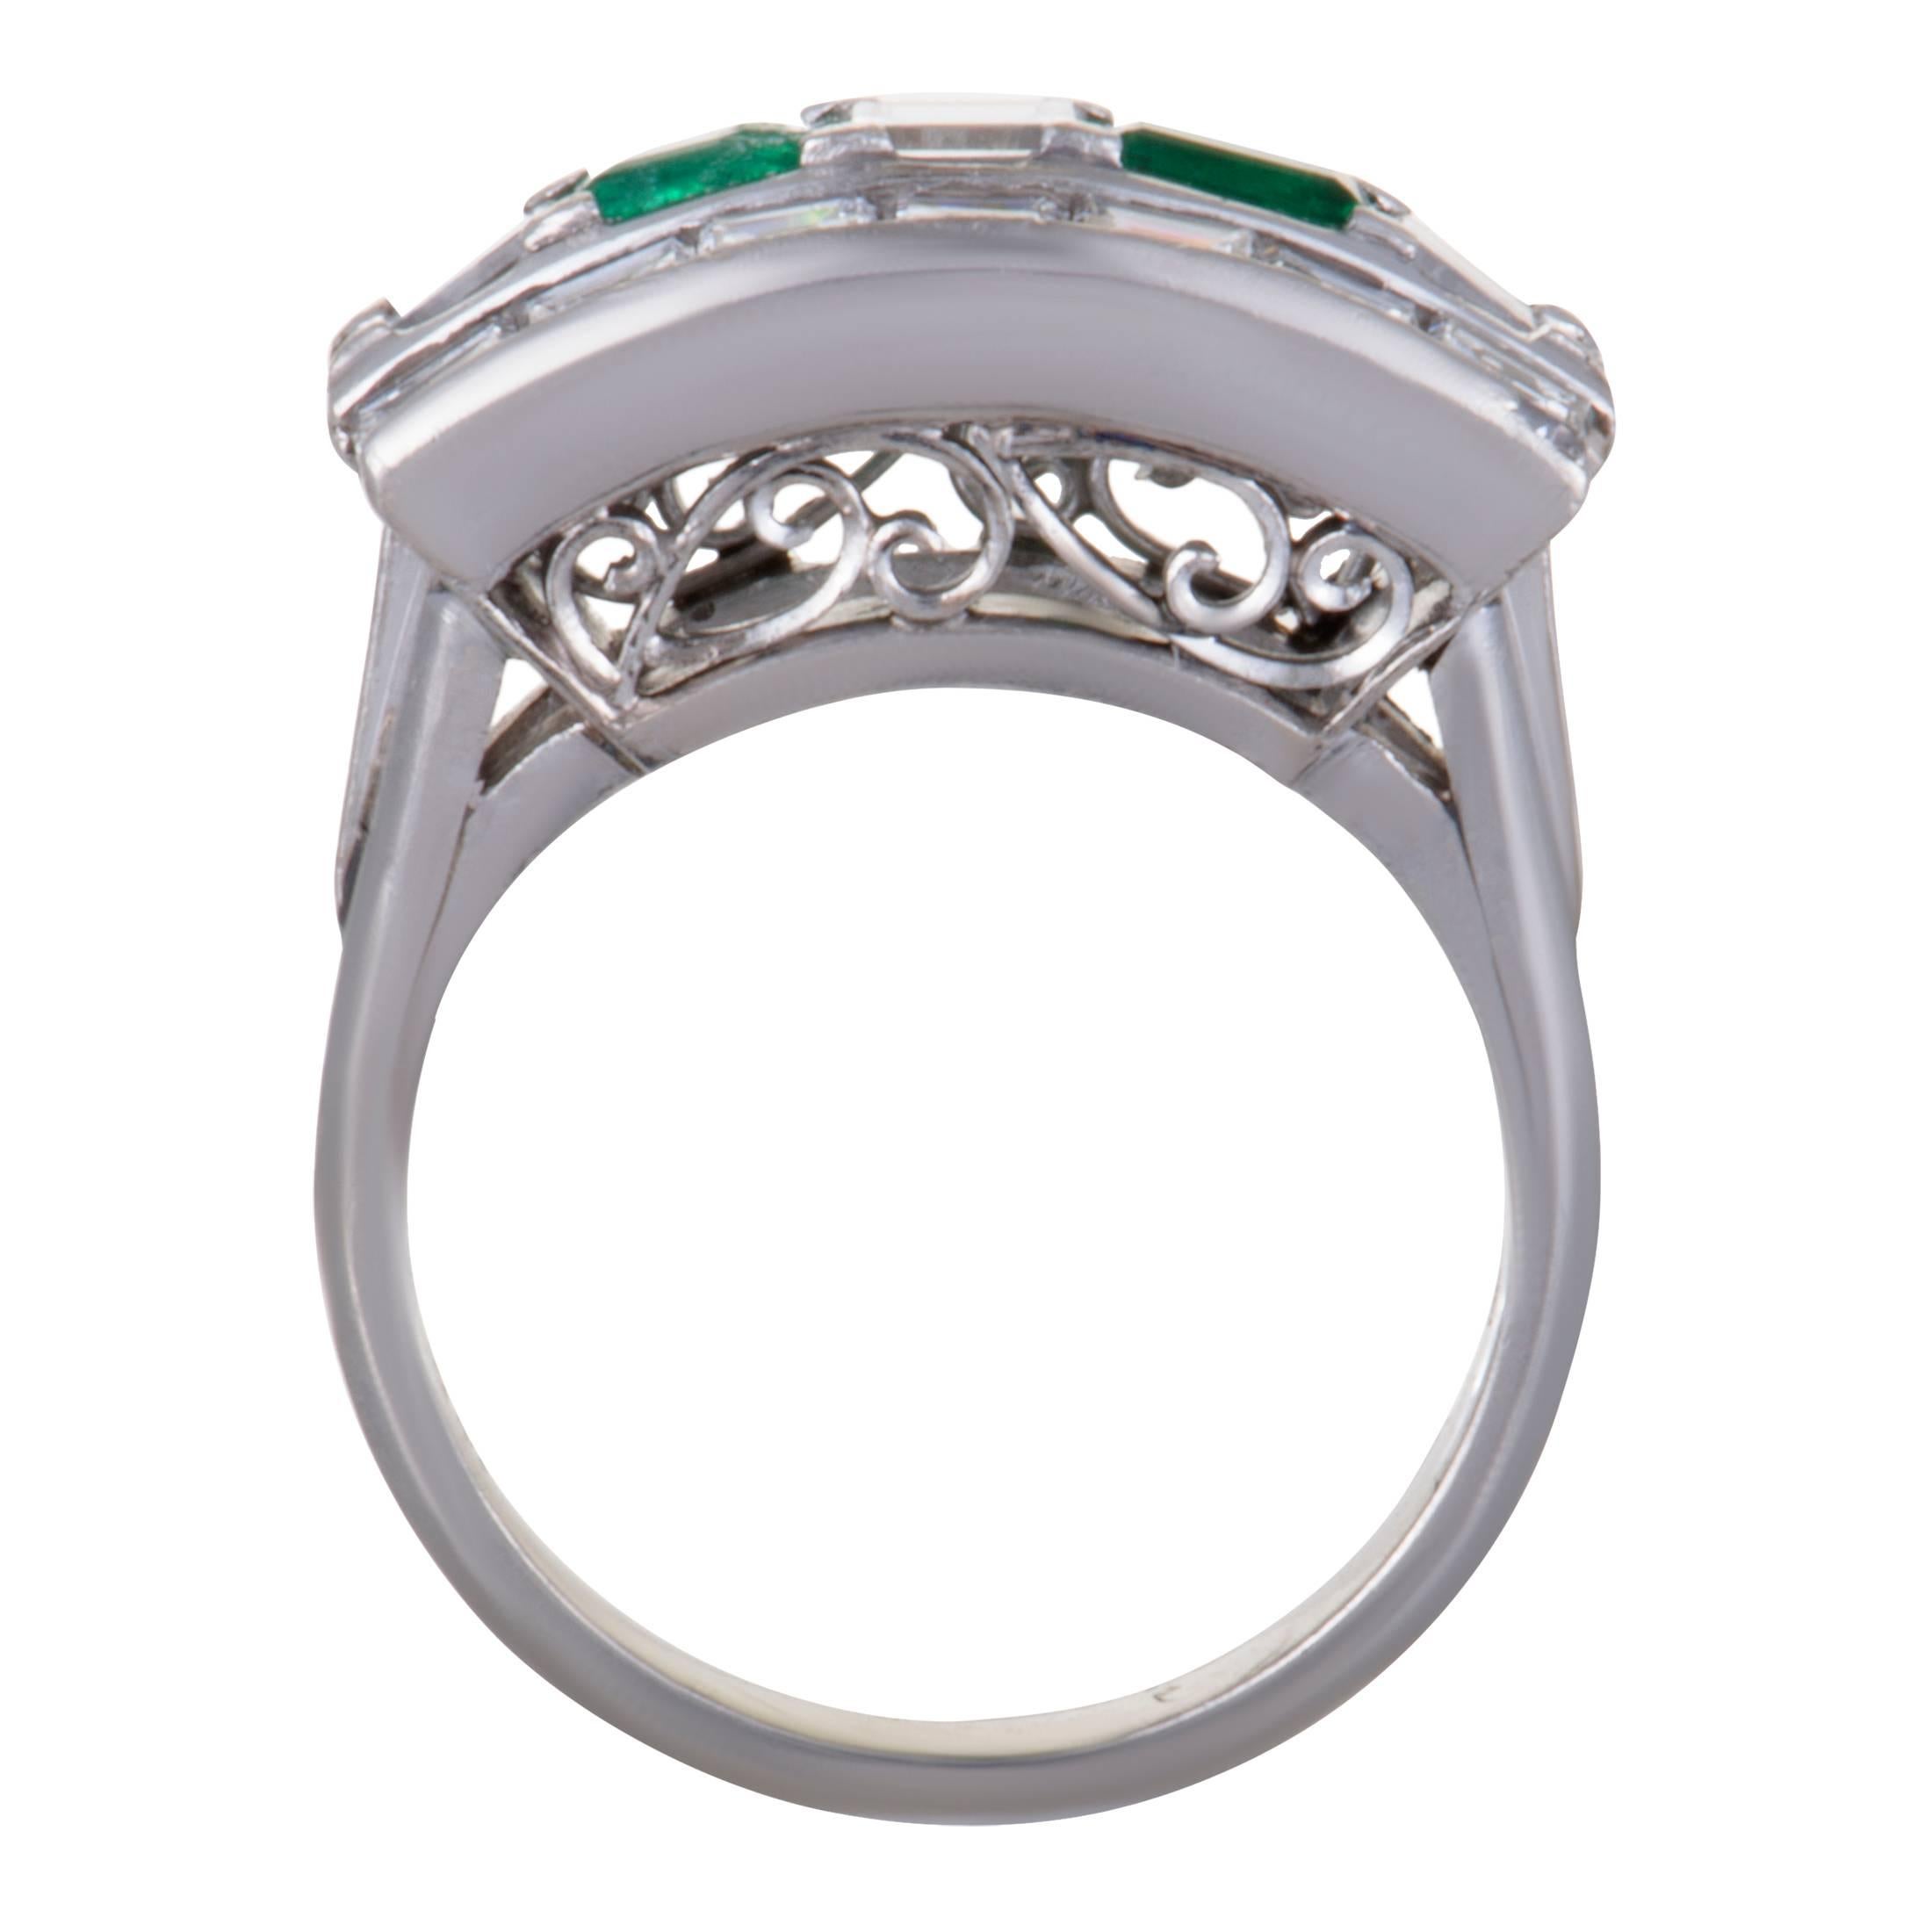 This classy platinum ring features a chic and elegant style. It's gorgeous design is embellished with 1.91ct of precious diamonds and stunning green emeralds of 0.41ct that adds glamour to the magnificent ring.
Ring Size: 6.25
Ring Top Dimensions: